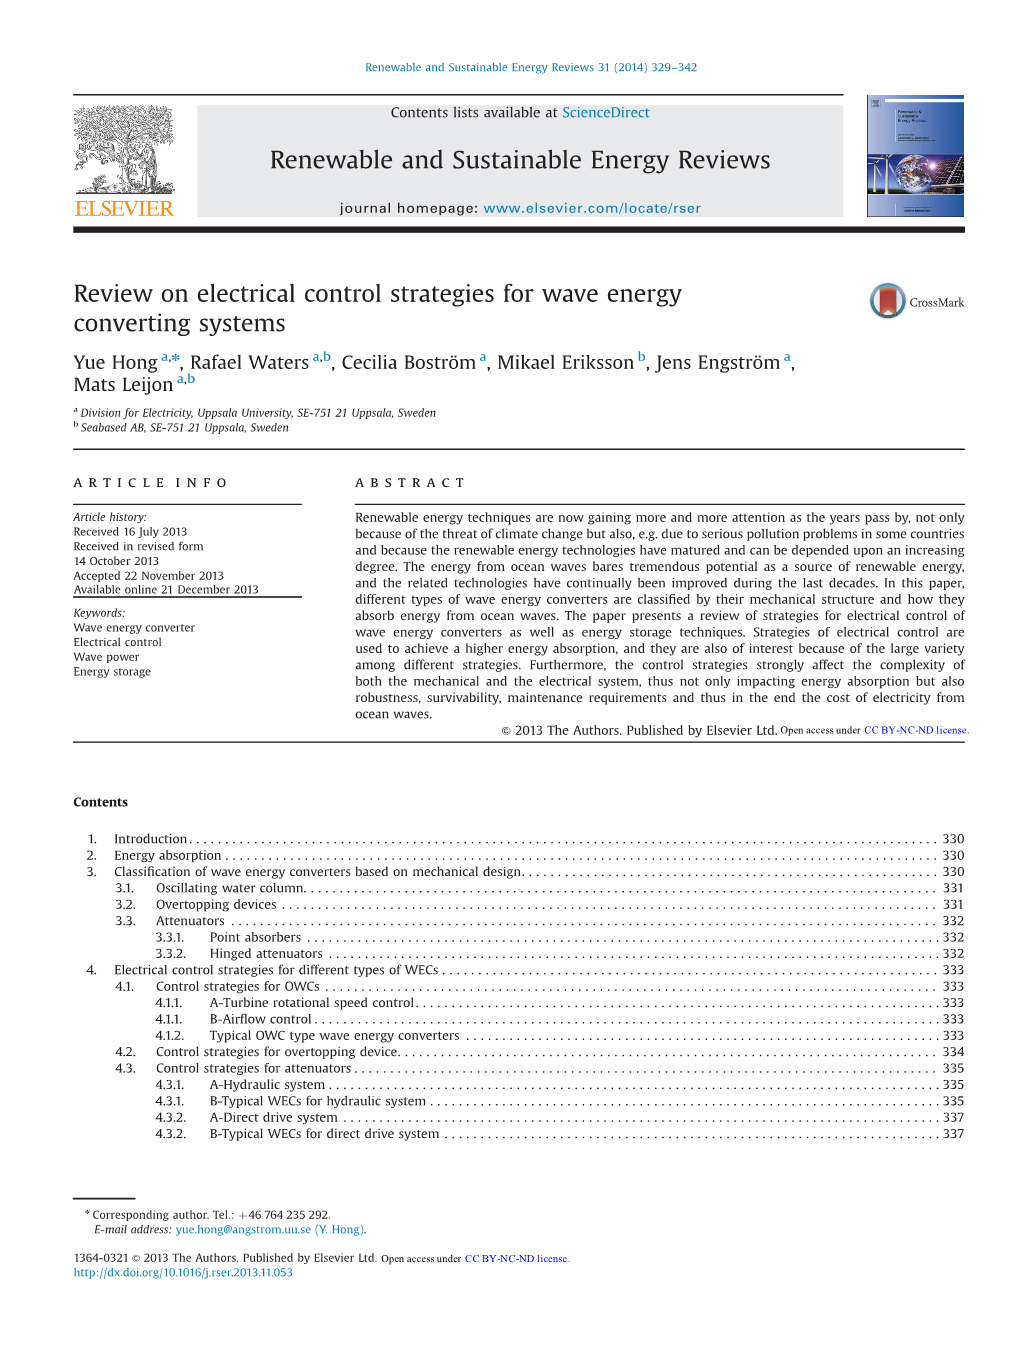 Review on Electrical Control Strategies for Wave Energy Converting Systems